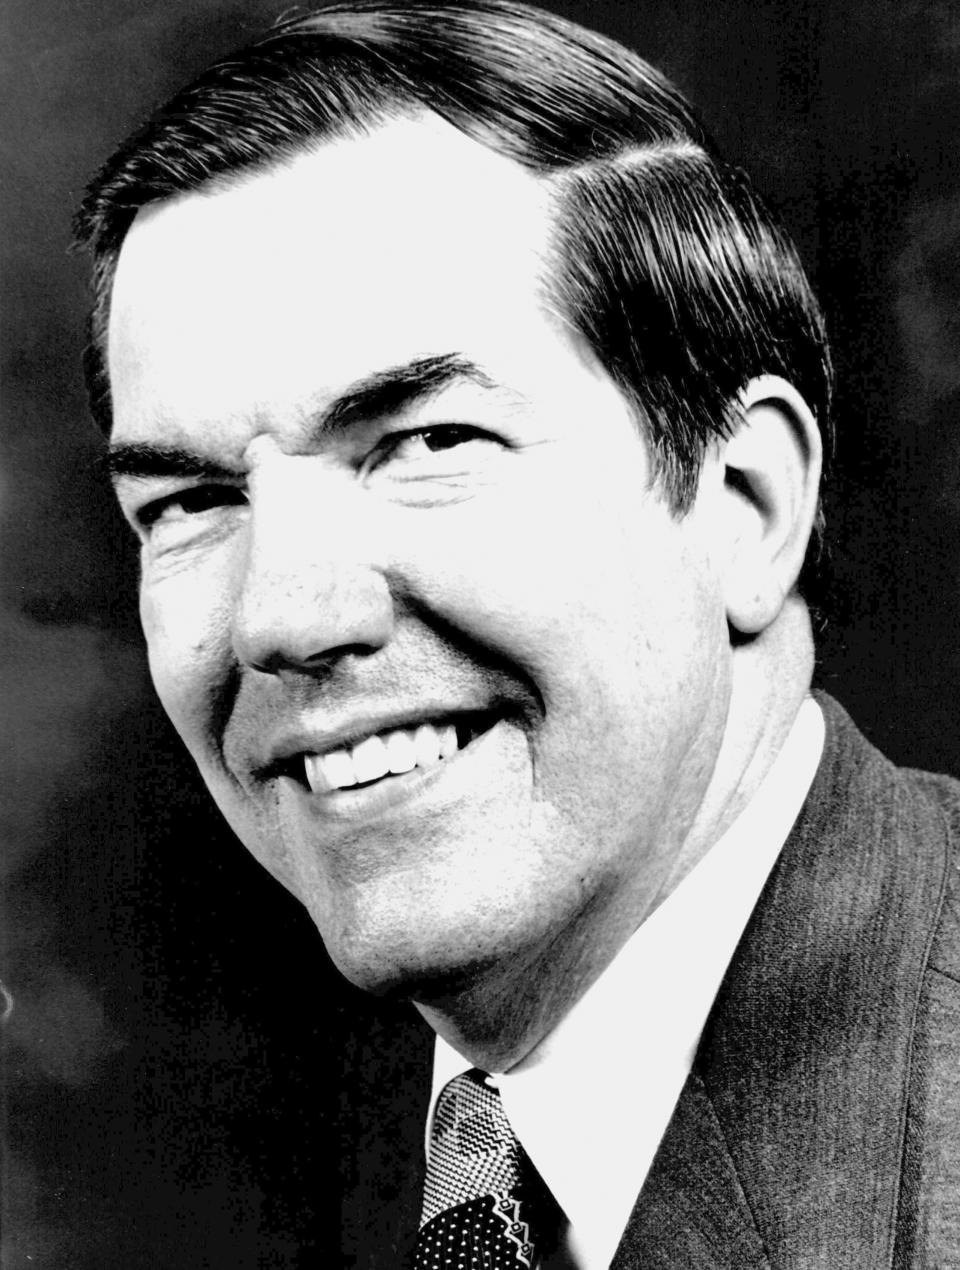 FILE - Hal Buell poses for a portrait in 1977 after he was named The Associated Press assistant general manager for news photos. Buell, who led The Associated Press' photo operations from the darkroom era into the age of digital photography over a four-decade career with the news organization that included 12 Pulitzer Prizes and running some of the defining images of the Vietnam War, has died. Buell died Monday, Jan. 29, 2024, in Sunnyvale, Calif., where his daughter lived, after battling pneumonia. He was 92. (AP Photo, File)